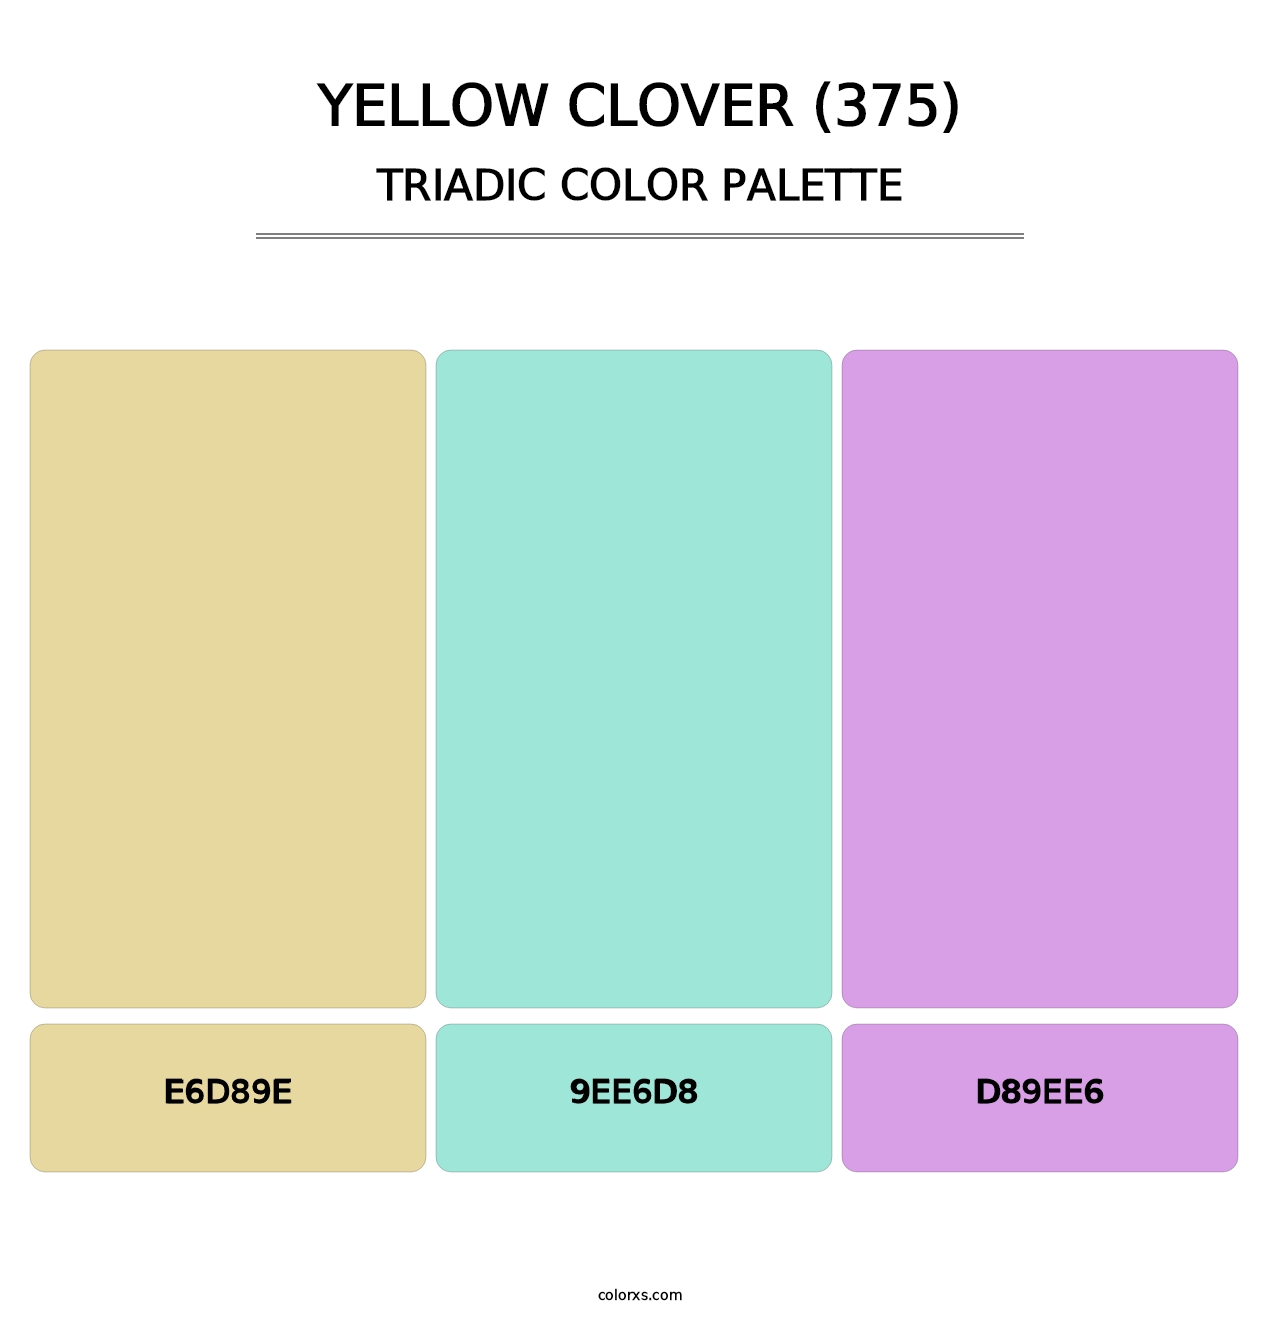 Yellow Clover (375) - Triadic Color Palette